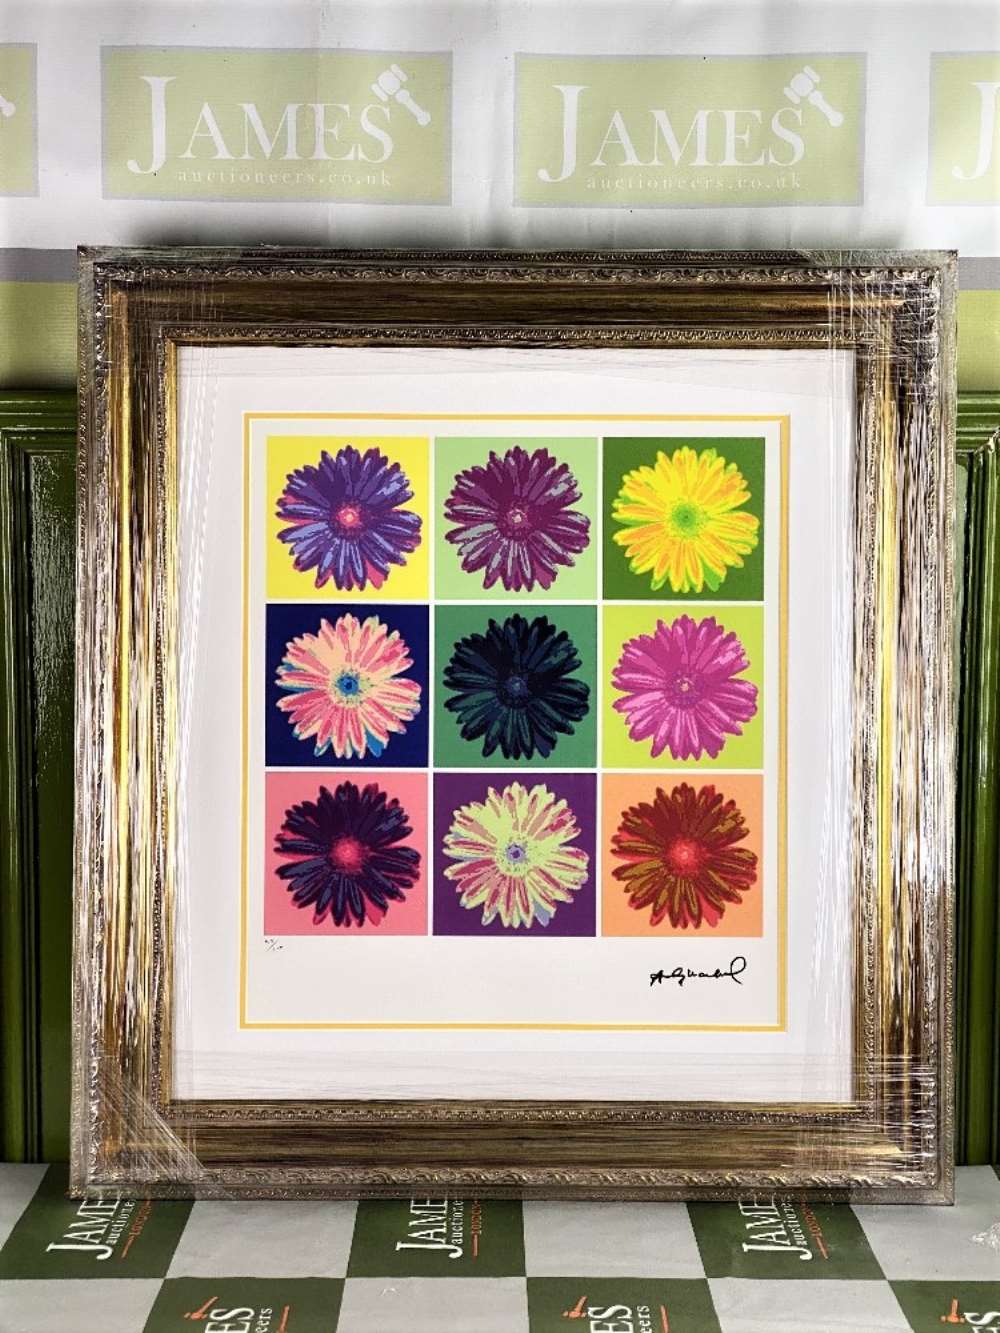 Andy Warhol (1928-1987) “Flowers” Numbered #50/100 Lithograph, Ornate Framed.